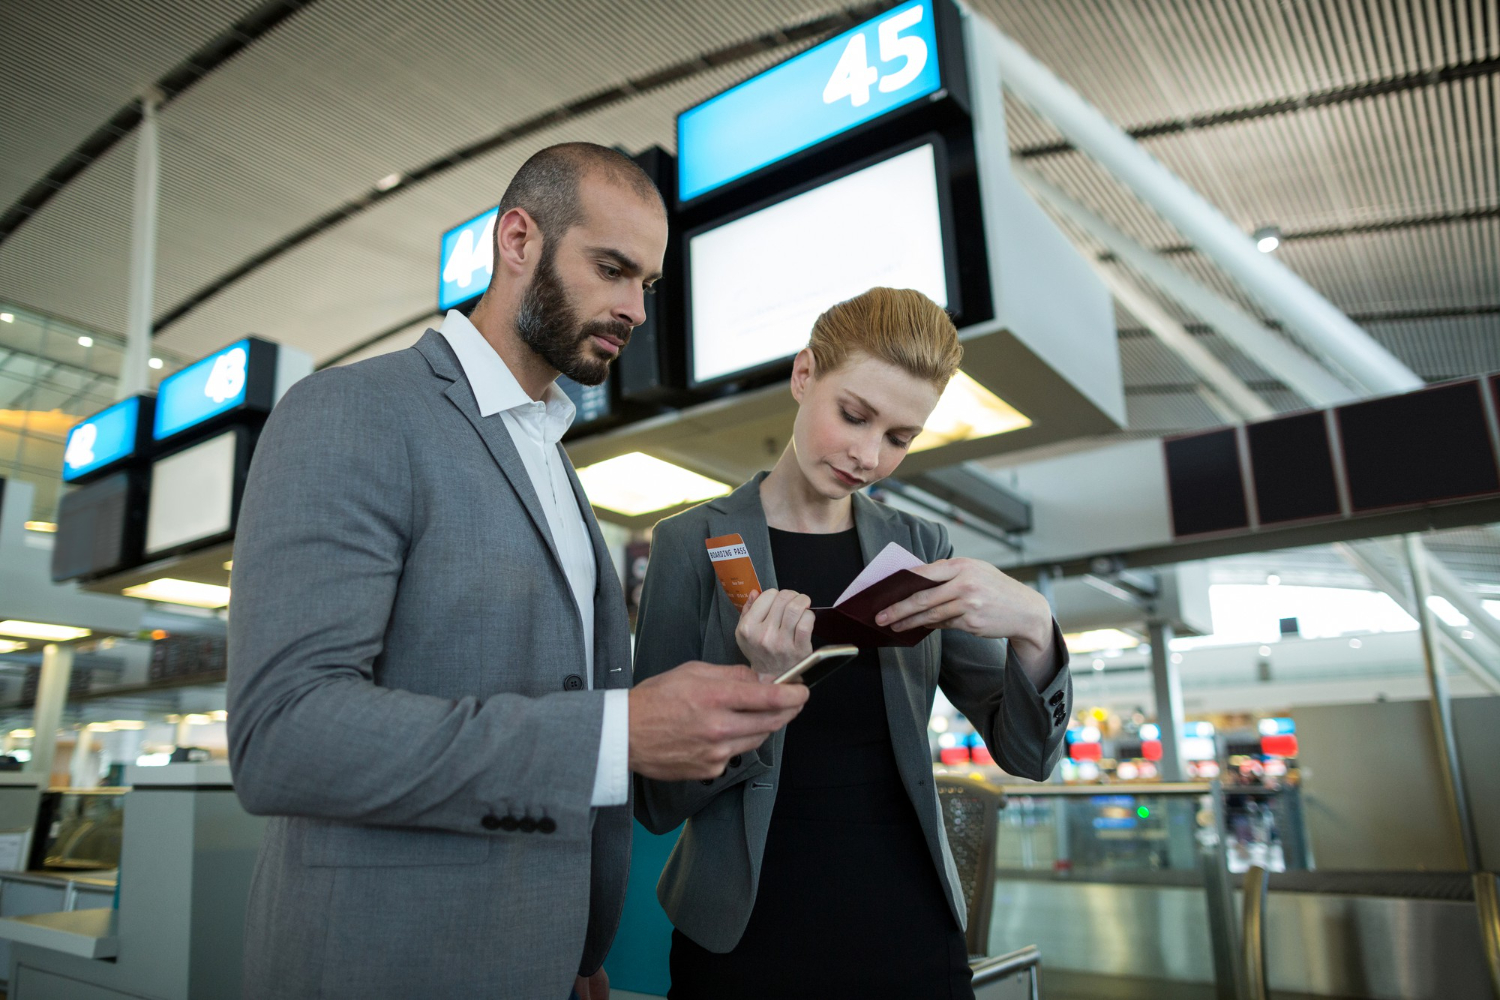 business-people-holding-boarding-pass-using-mobile-phone